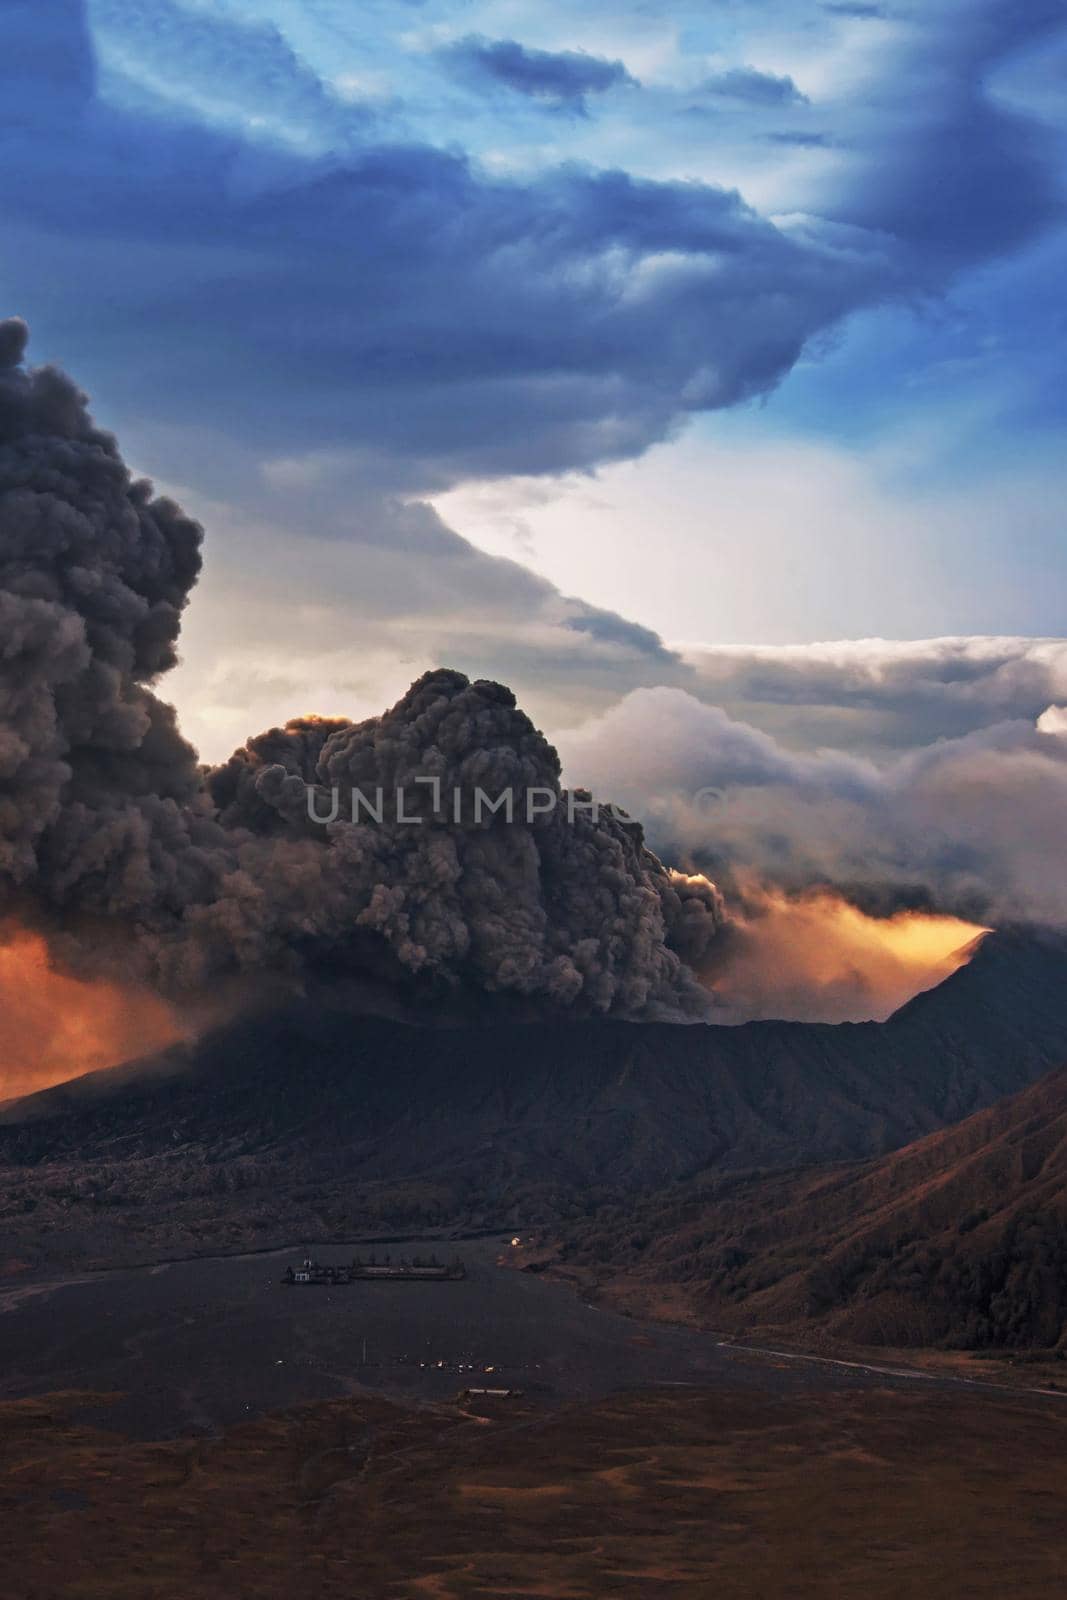 Mount Bromo volcano (Gunung Bromo) eruption during sunrise from viewpoint on Mount Penanjakan. Mount Bromo located in Bromo Tengger Semeru National Park, East Java, Indonesia. by Nuamfolio